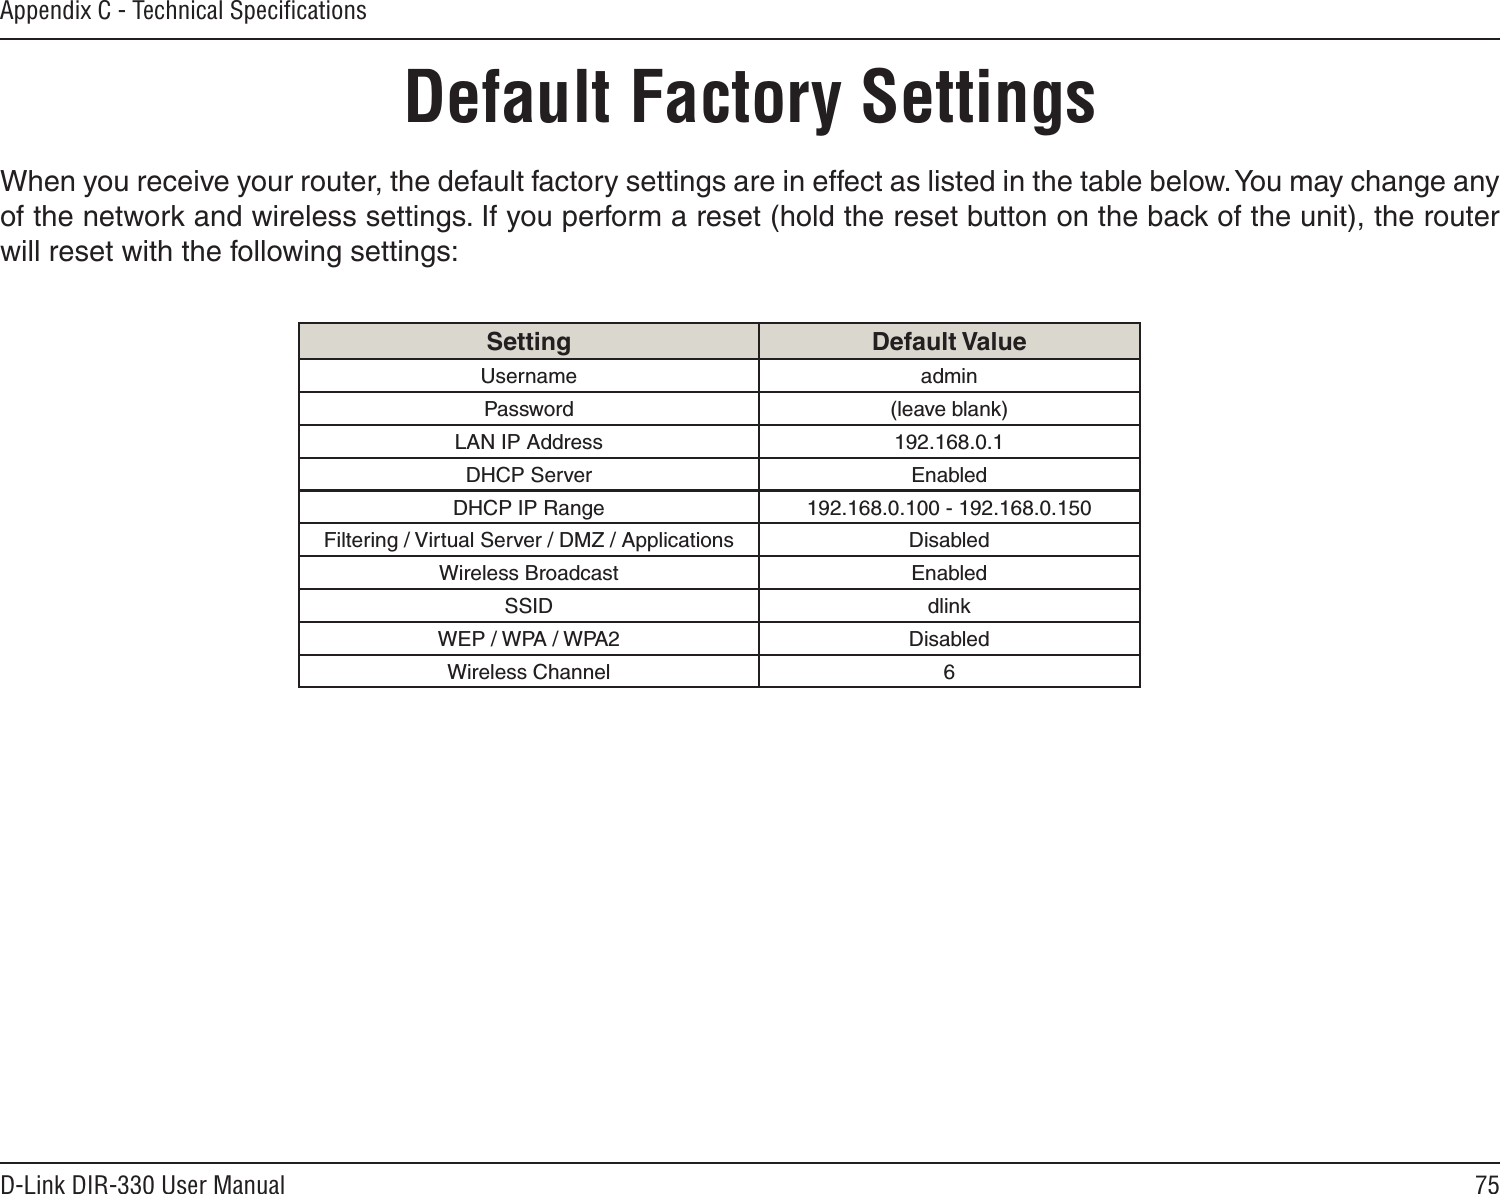 75D-Link DIR-330 User ManualAppendix C - Technical SpeciﬁcationsDefault Factory SettingsWhen you receive your router, the default factory settings are in effect as listed in the table below. You may change any of the network and wireless settings. If you perform a reset (hold the reset button on the back of the unit), the router will reset with the following settings:Setting Default ValueUsername adminPassword (leave blank)LAN IP Address 192.168.0.1DHCP Server EnabledDHCP IP Range 192.168.0.100 - 192.168.0.150Filtering / Virtual Server / DMZ / Applications DisabledWireless Broadcast EnabledSSID dlinkWEP / WPA / WPA2 DisabledWireless Channel 6